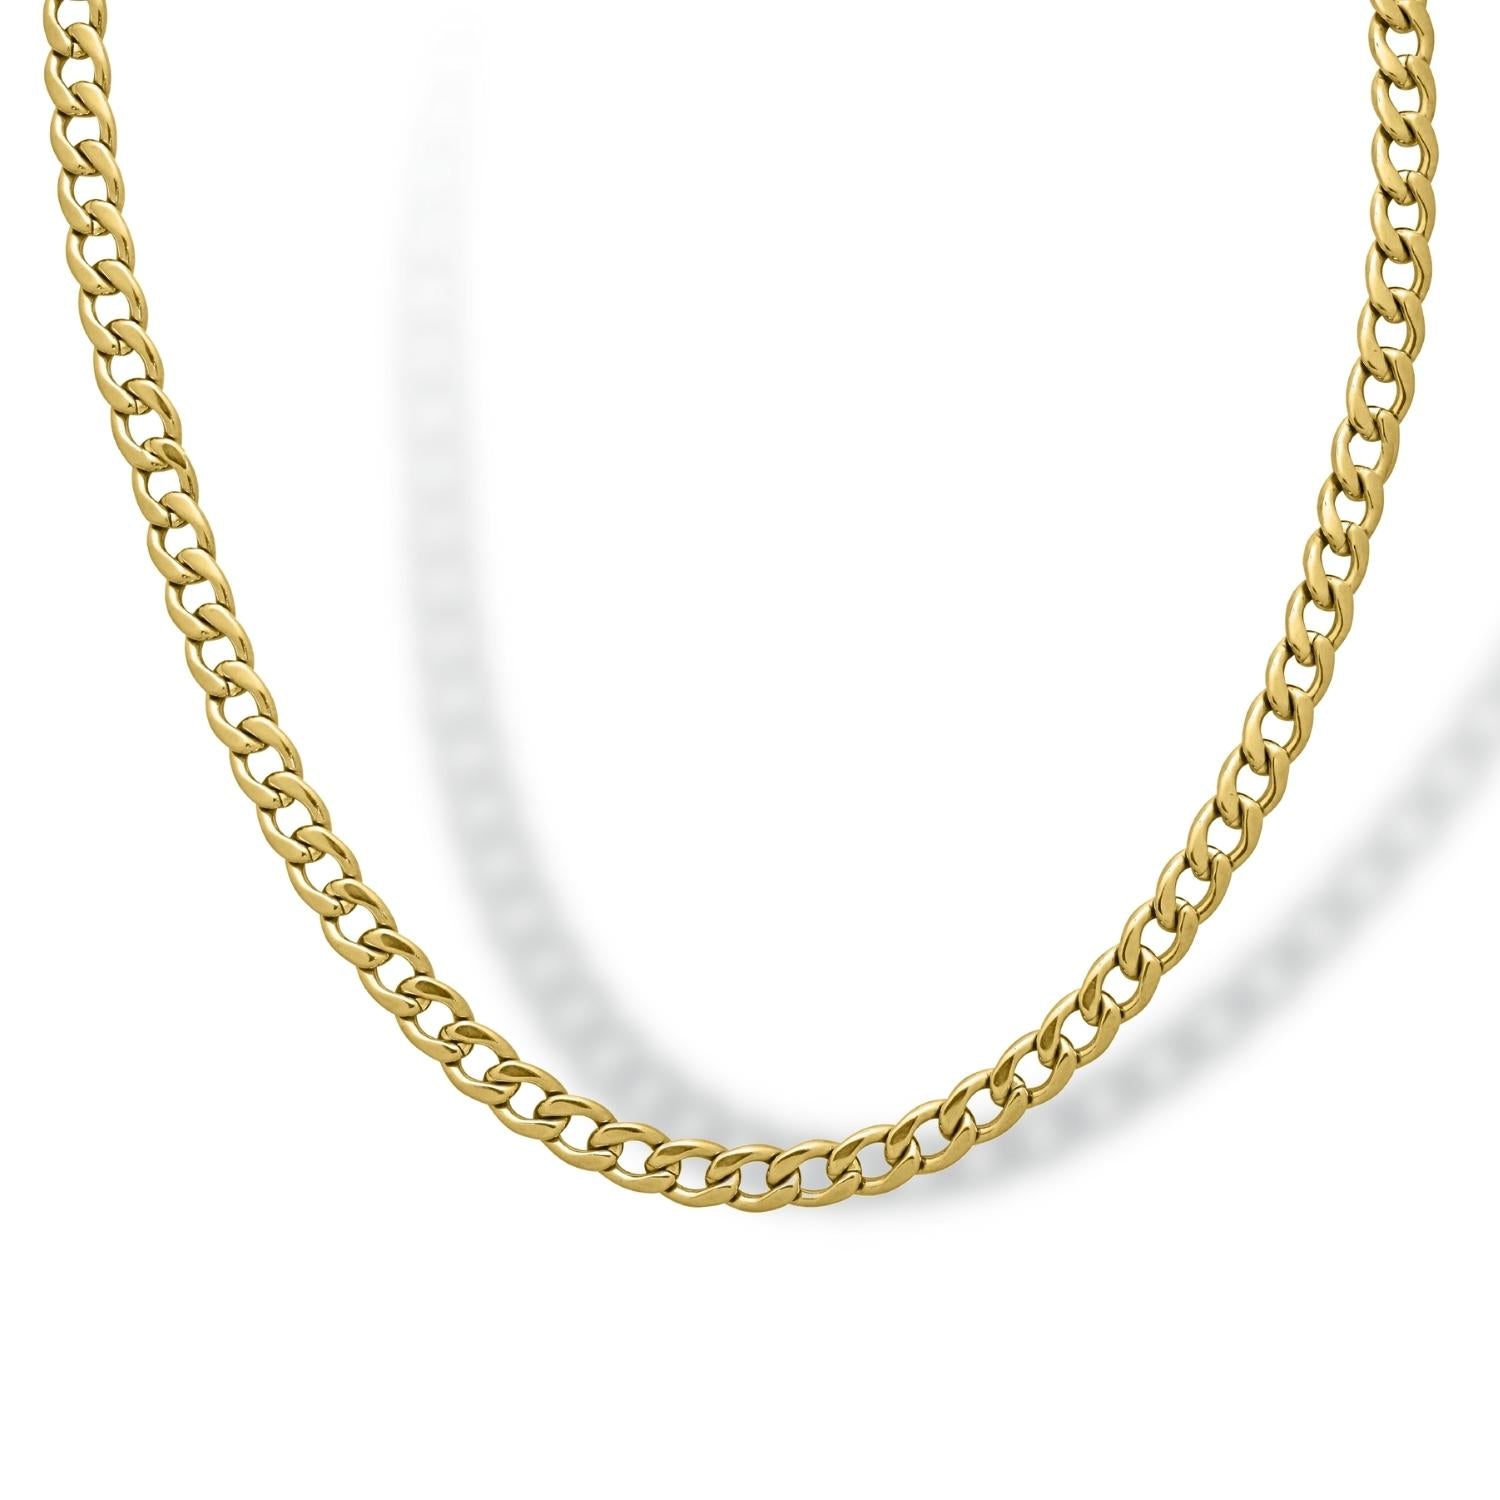 Solid Yellow Gold Curb Chain 3.5mm Width